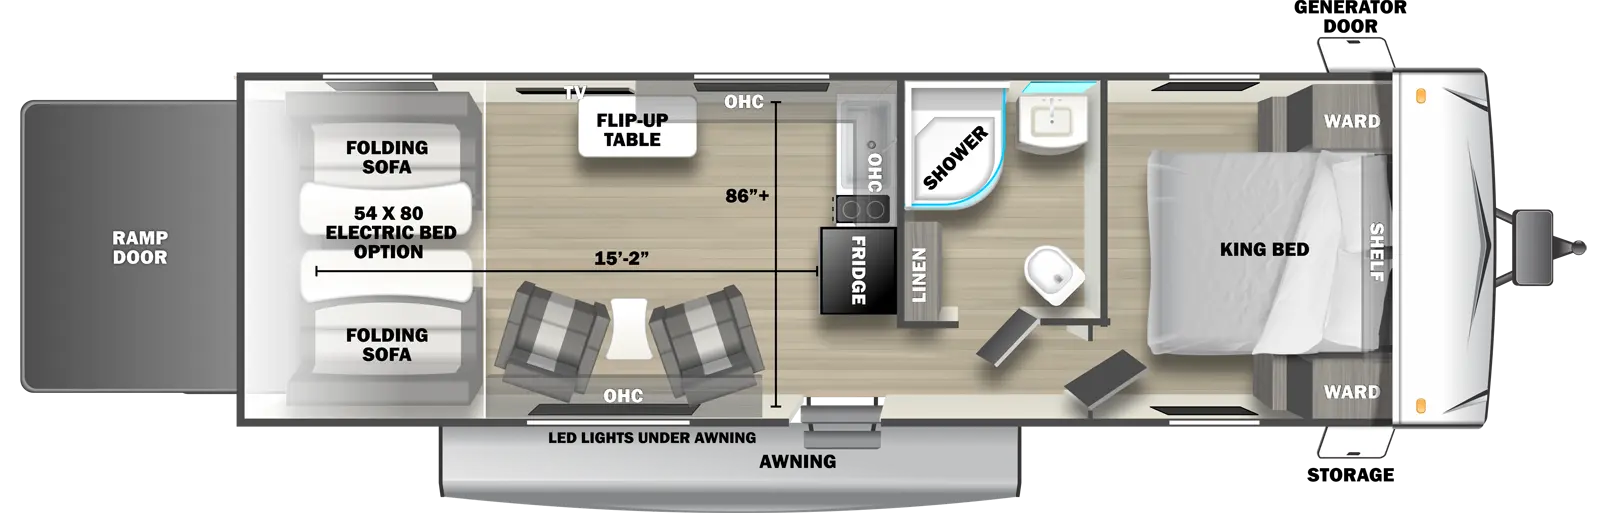 The 2750RLX travel trailer has no slide outs, 1 entry door and 1 rear ramp door. Exterior features include an awning with LED lights, front door side storage and front off-door side generator door. Interior layout from front to back includes: front bedroom with foot-facing King bed, shelf over the bed, and front corner wardrobes; off-door side bathroom with shower, linen storage, toilet and single sink vanity; rear facing kitchen countertop with sink, overhead cabinet, stove top and rear facing refrigerator; overhead cabinet continues to off-door side; off-door side TV with flip-up table; 2 door side recliners with end table; and rear 54 x 80 electric bed option over electric pass-through dinette. Cargo length from rear of unit to refrigerator is 15 ft. 2 in. Cargo width from wall to wall is is 86 inches.